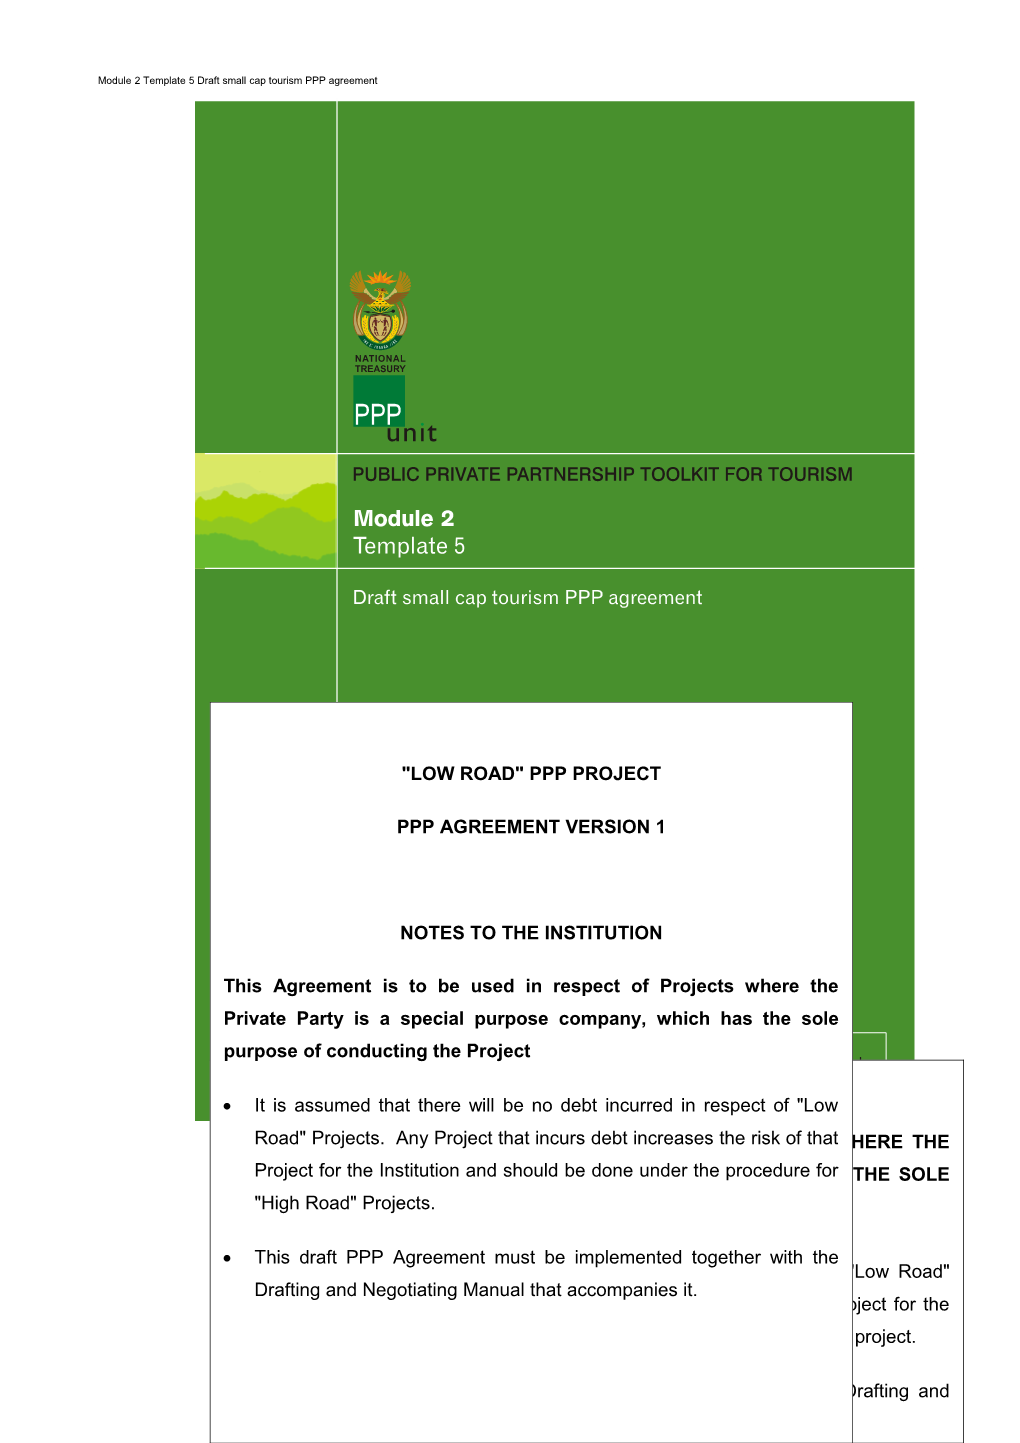 Module 2 Template 5 Draft Small Cap Tourism PPP Agreement